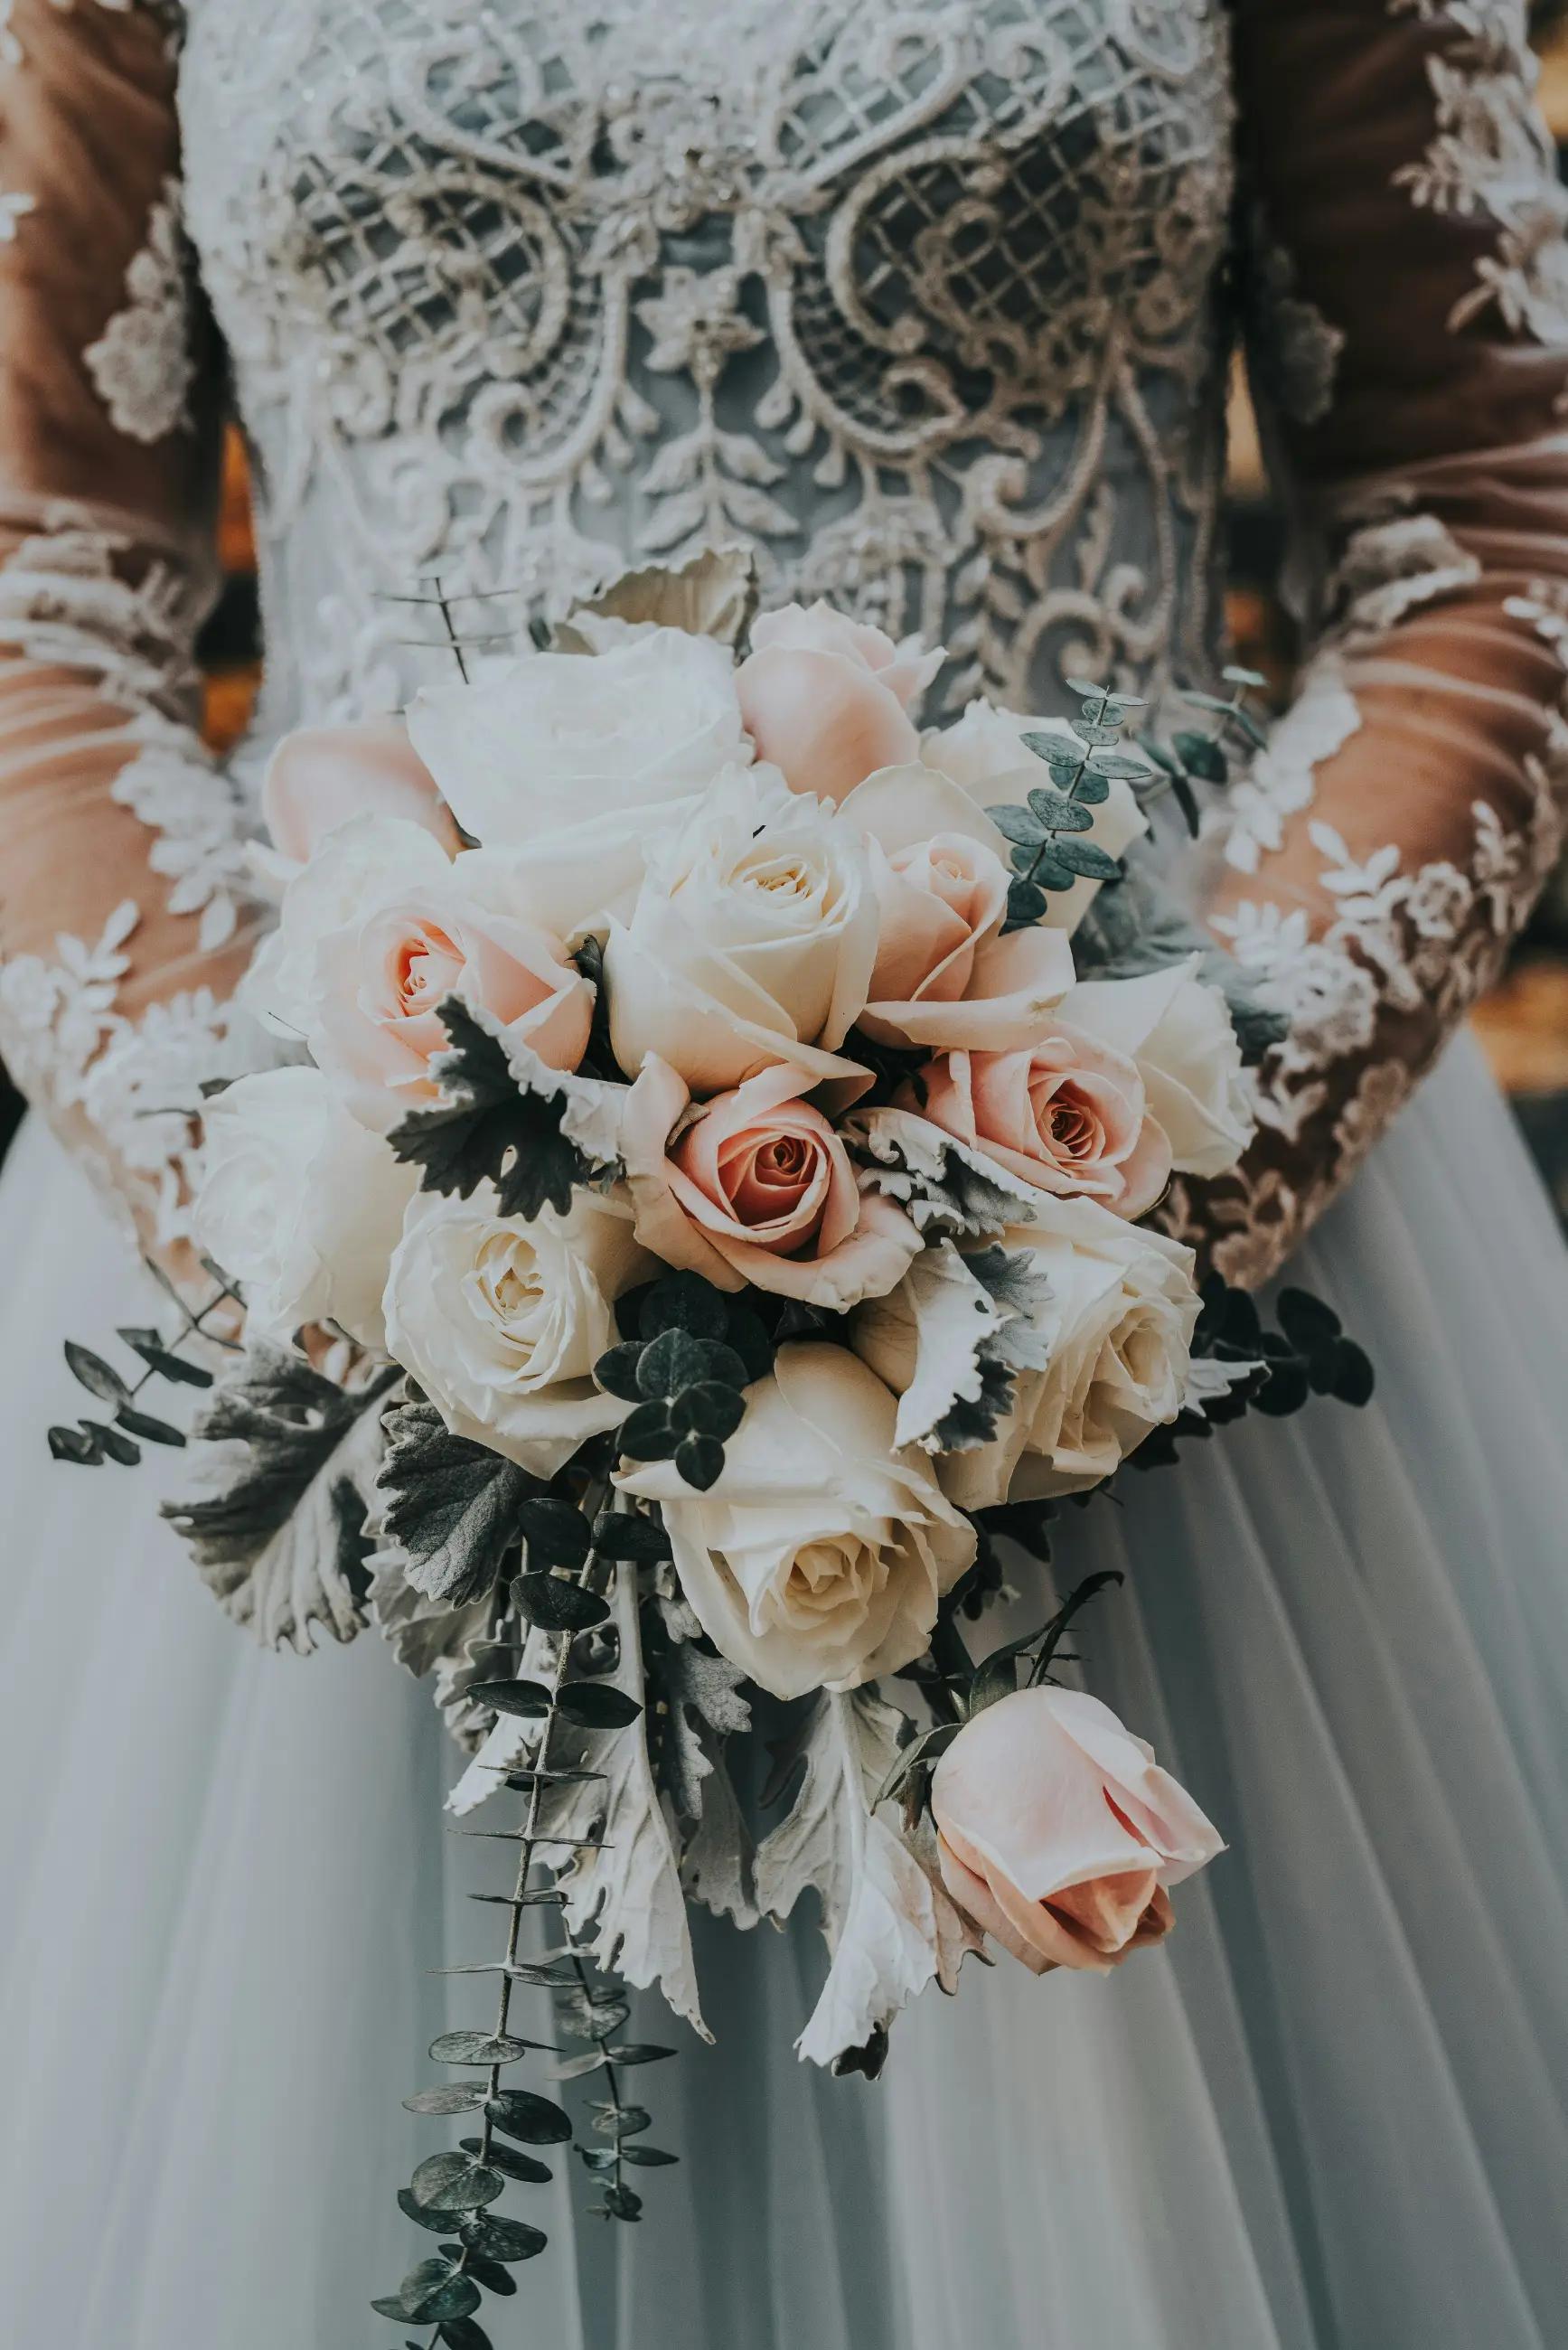 Bridal Bouquet Trends: Statement Blooms for Every Season Image